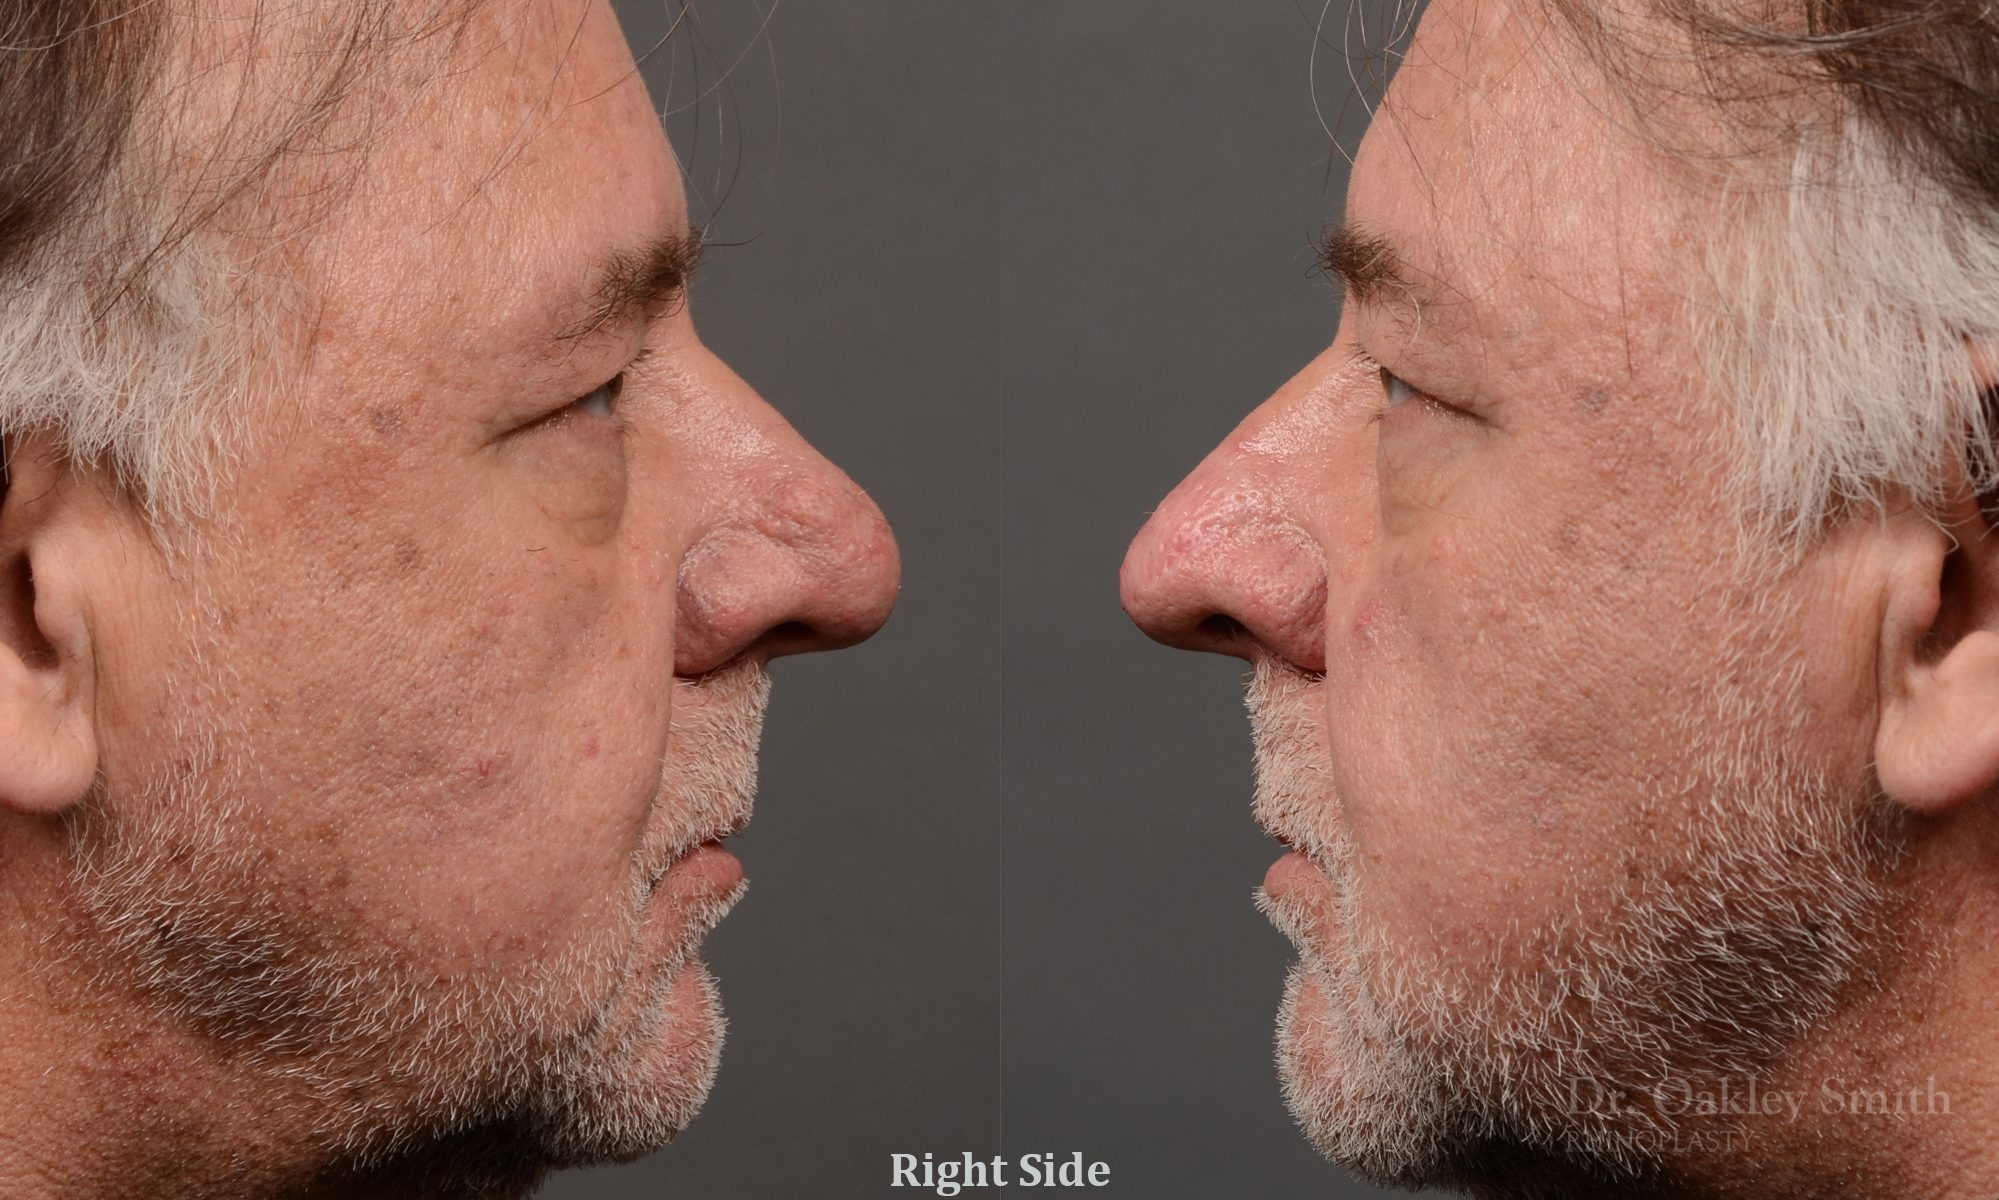 rhinoplasty OHIP nose surgery for breathing